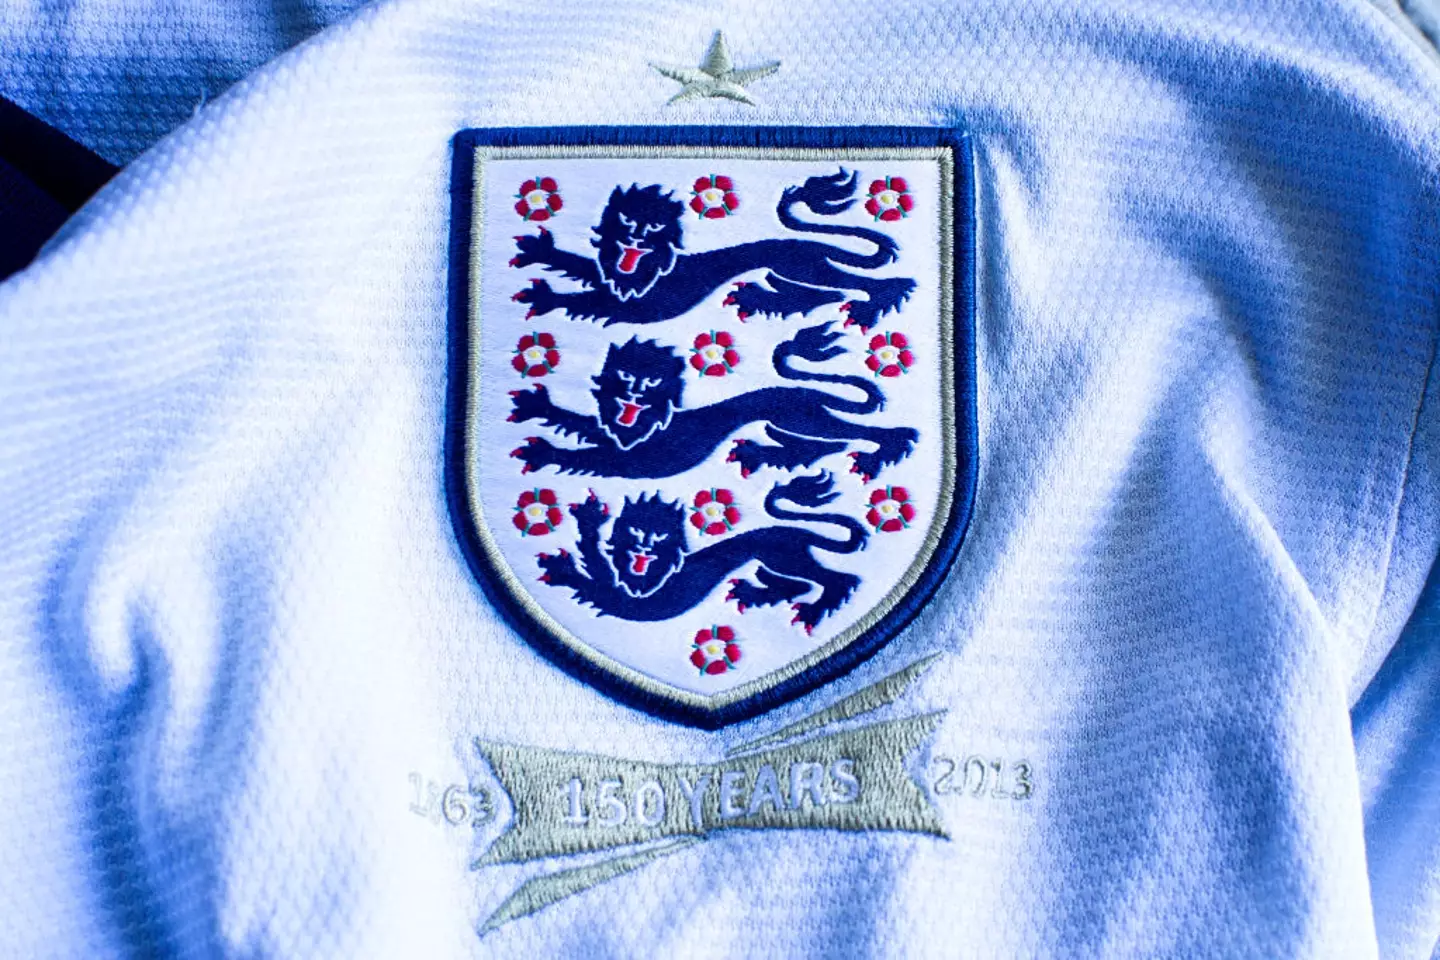 England have wearing wearing the Three Lions crest for more than 150 years (Image: Getty)